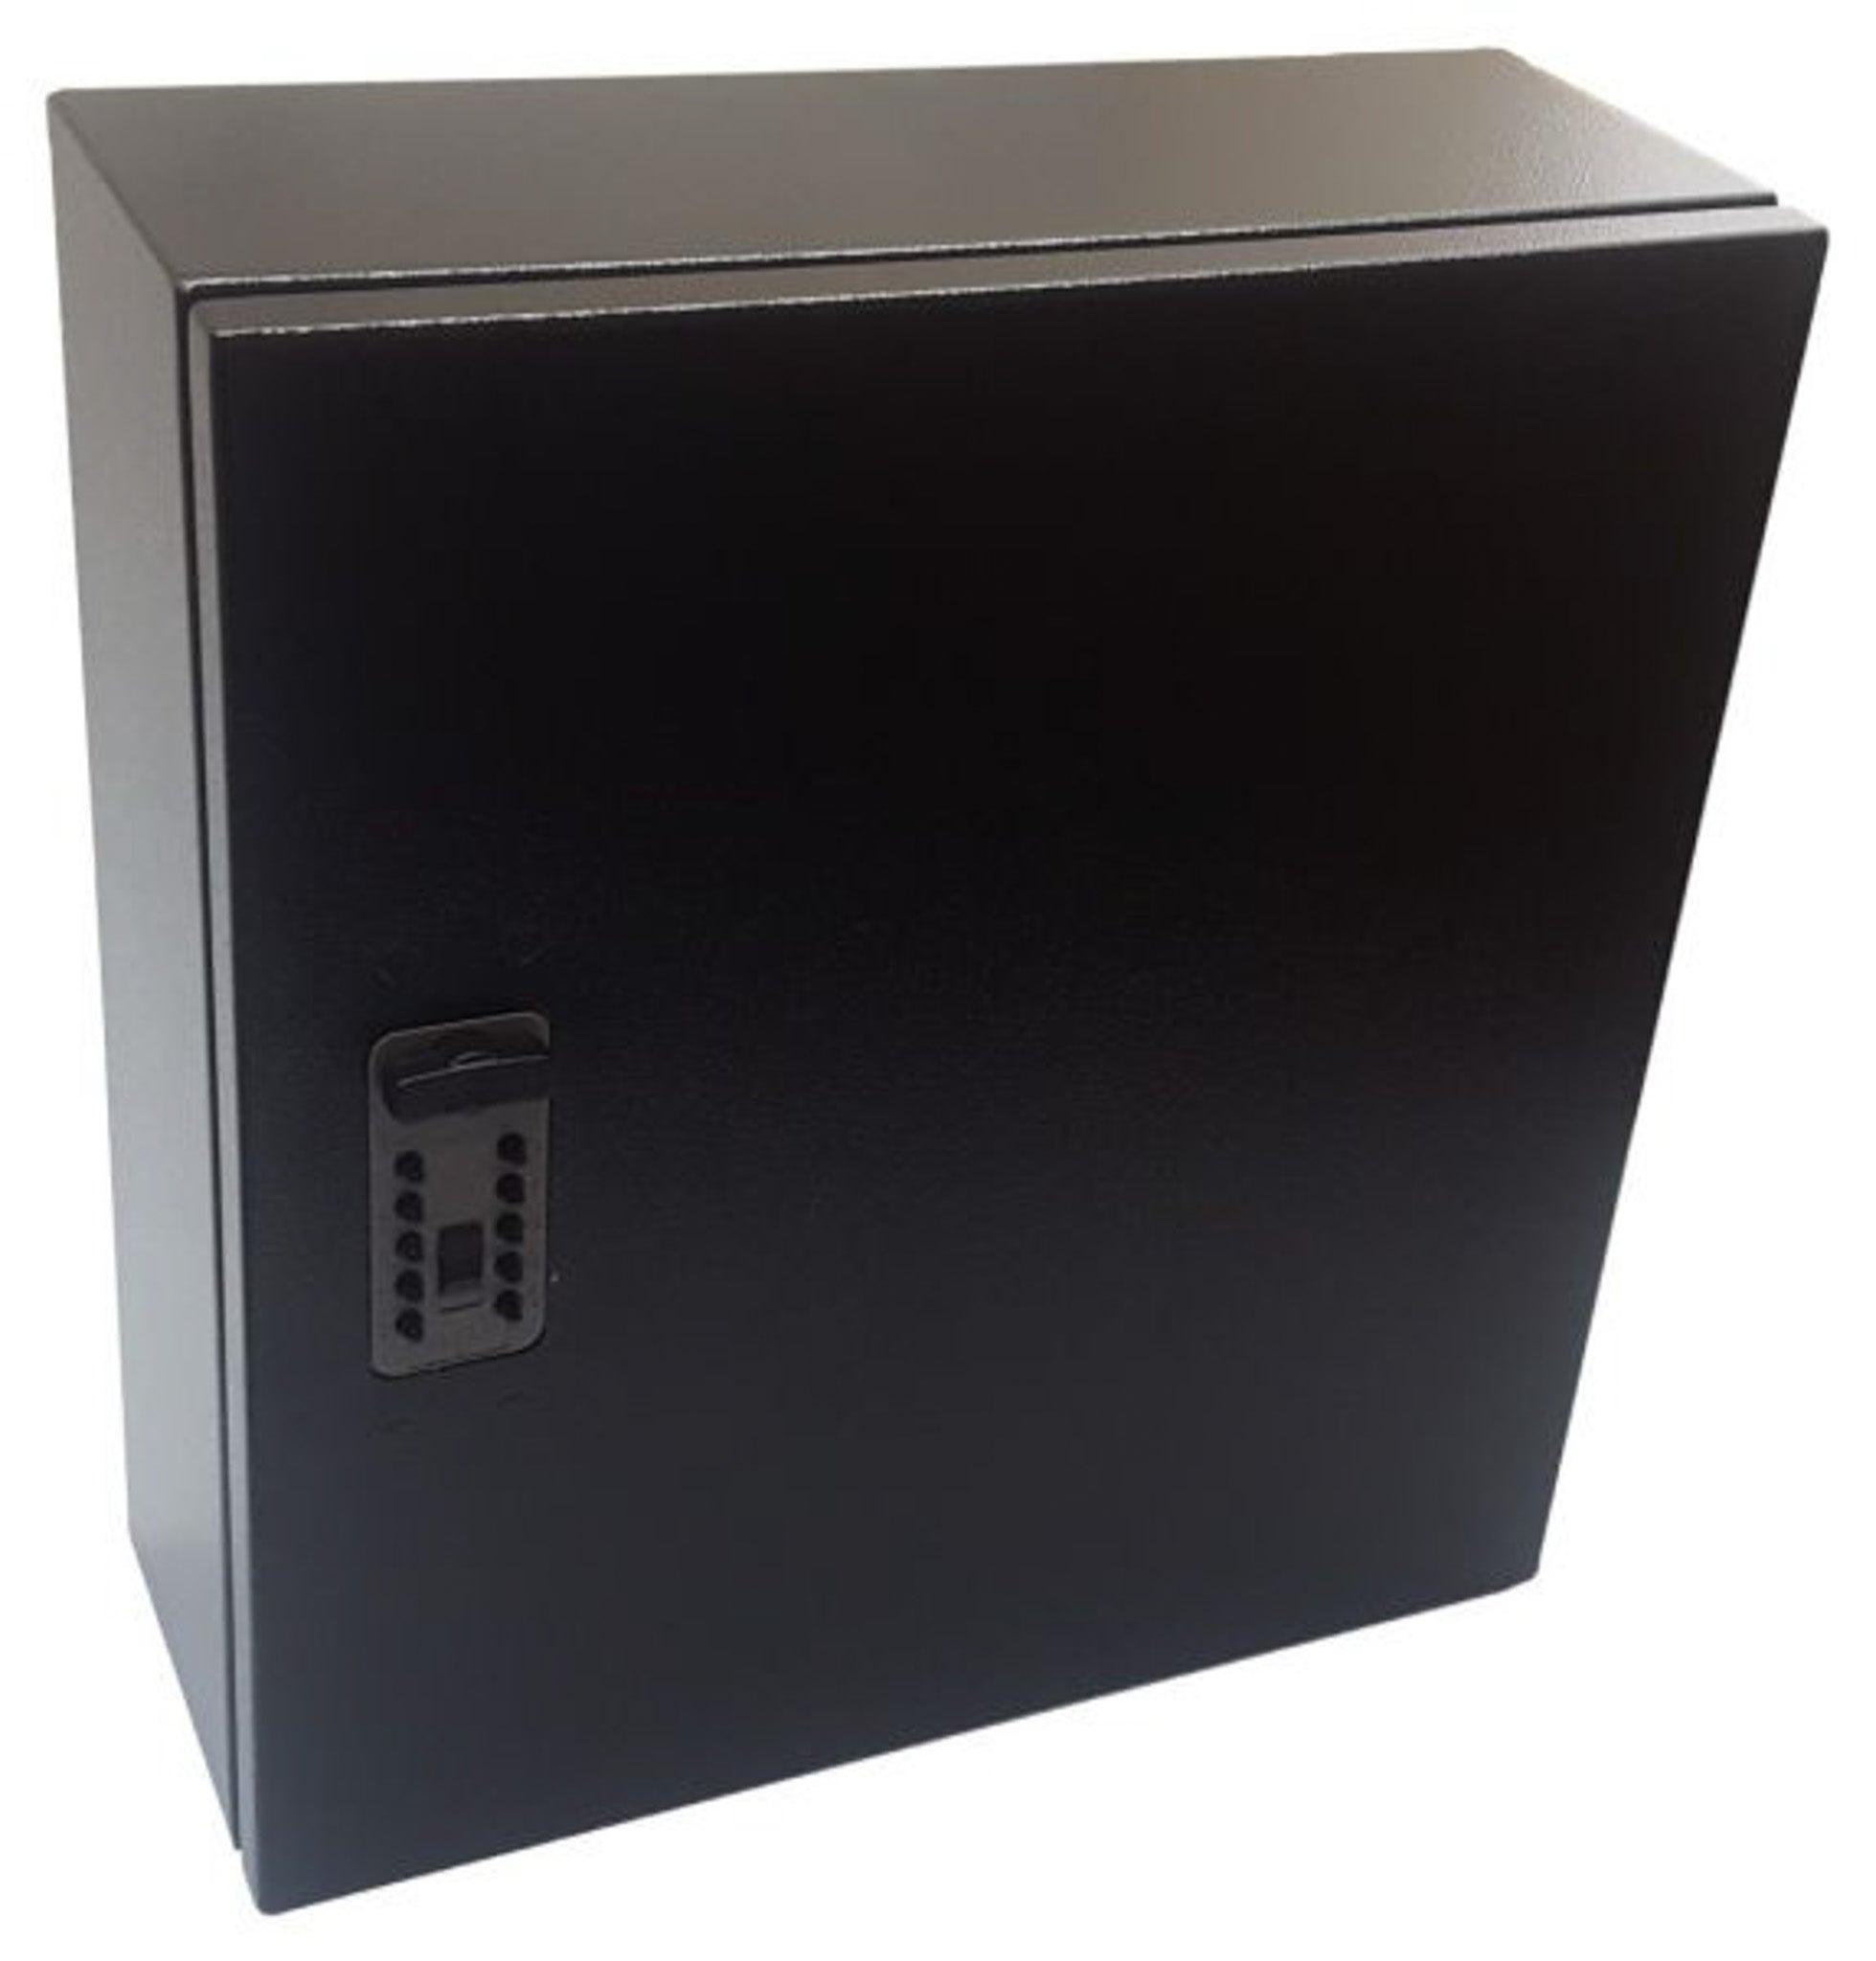 Large black IP54 fire document cabinet showing  code locking mechanism